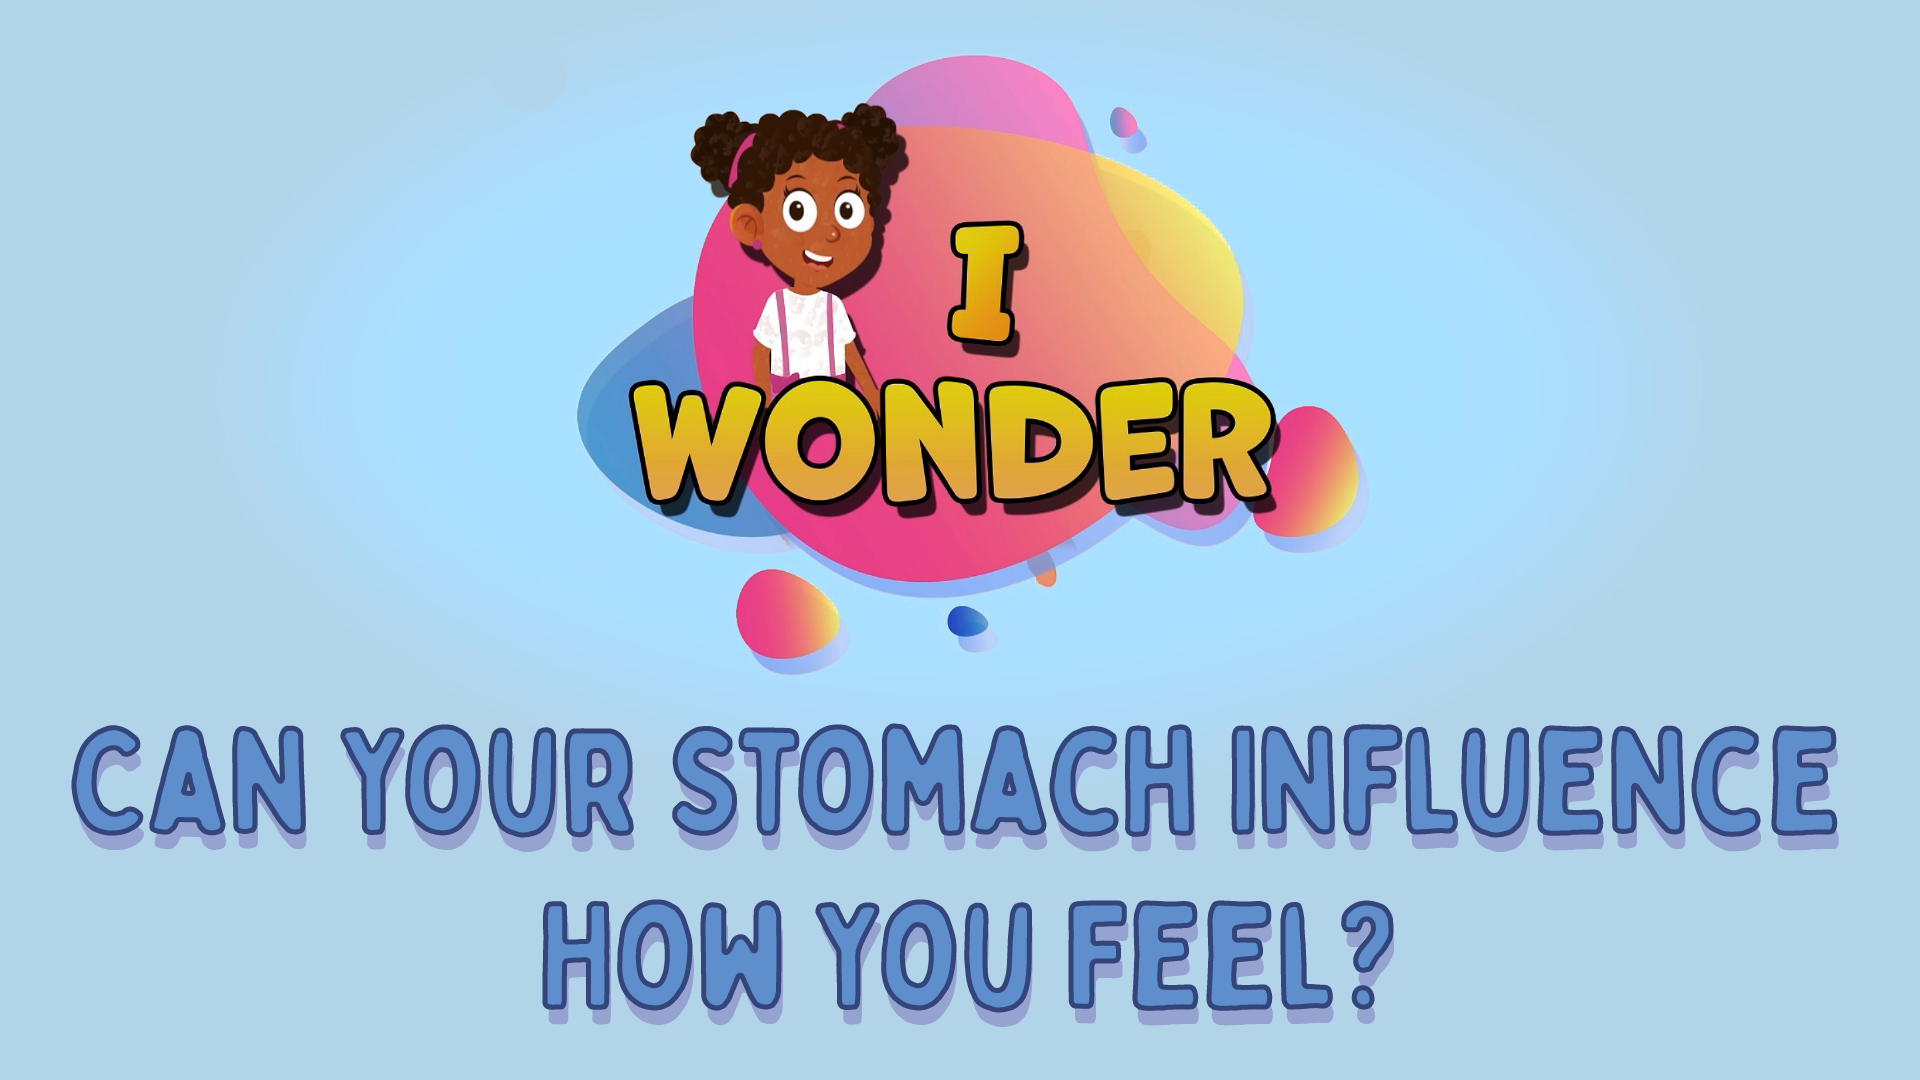 Can Your Stomach Influence How You Feel?